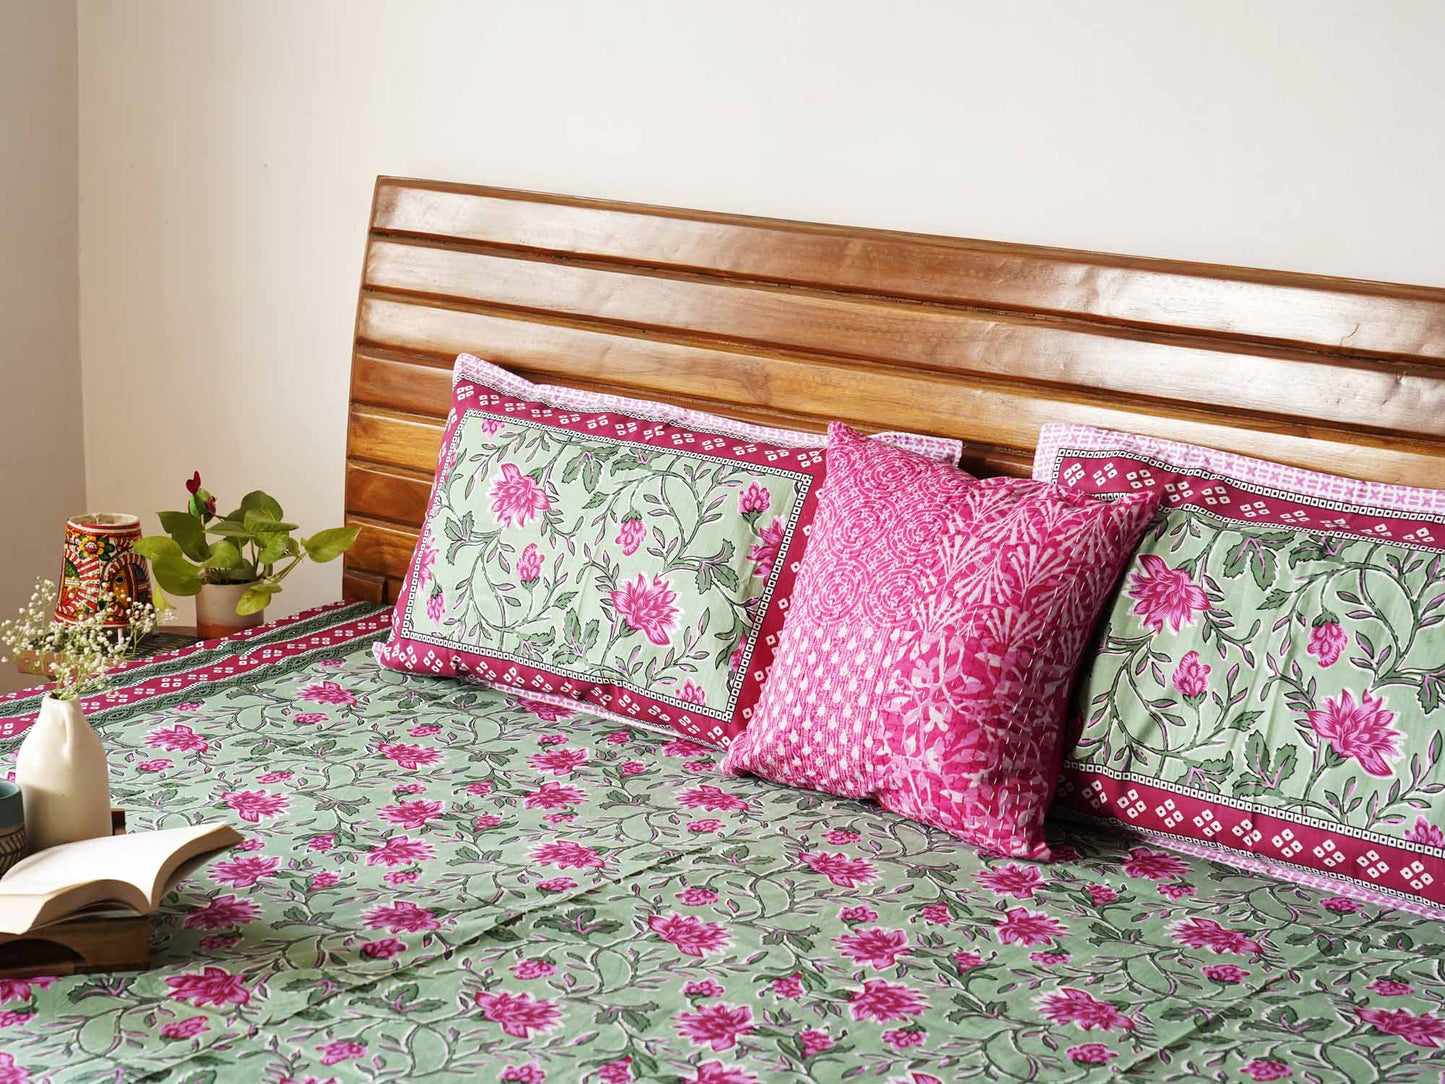 Baagh - Green - Flat/Fitted Bedsheet (90x108 Inches)